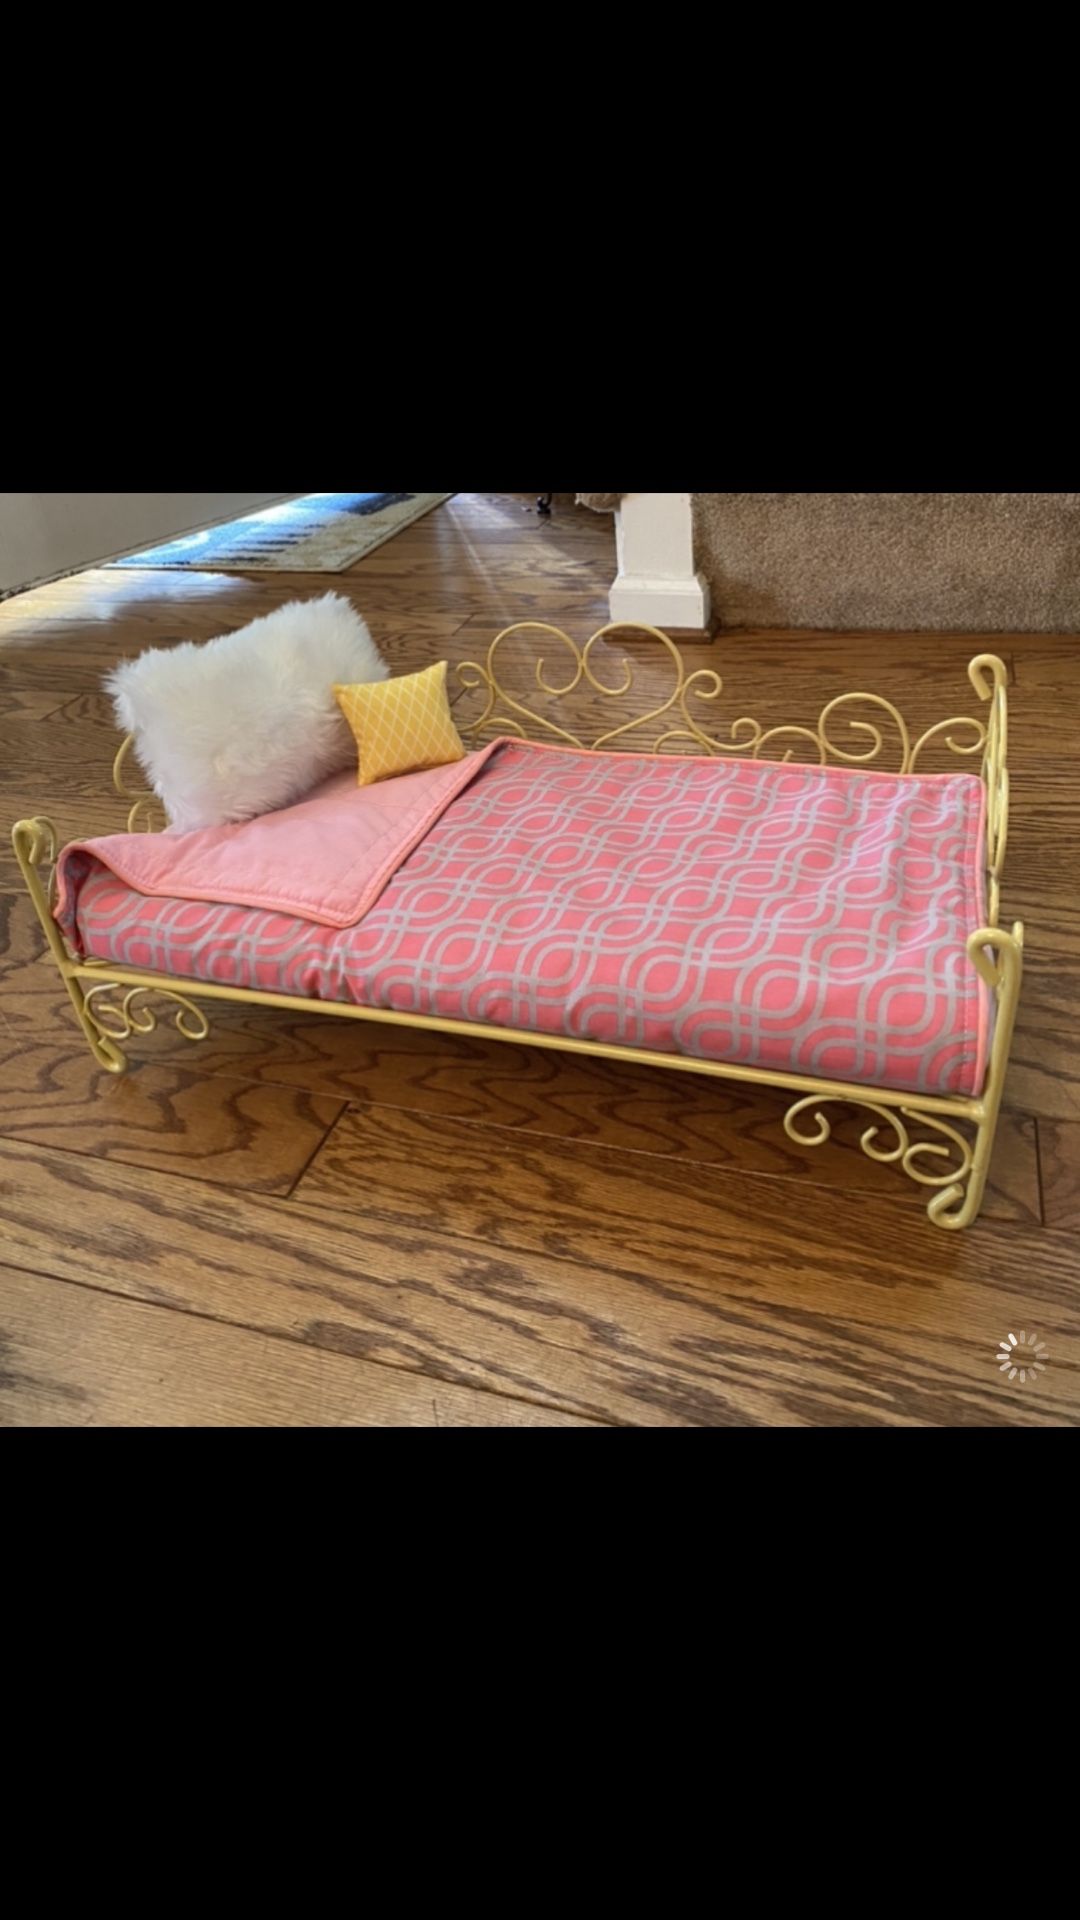 Our Generation American Girl doll bed